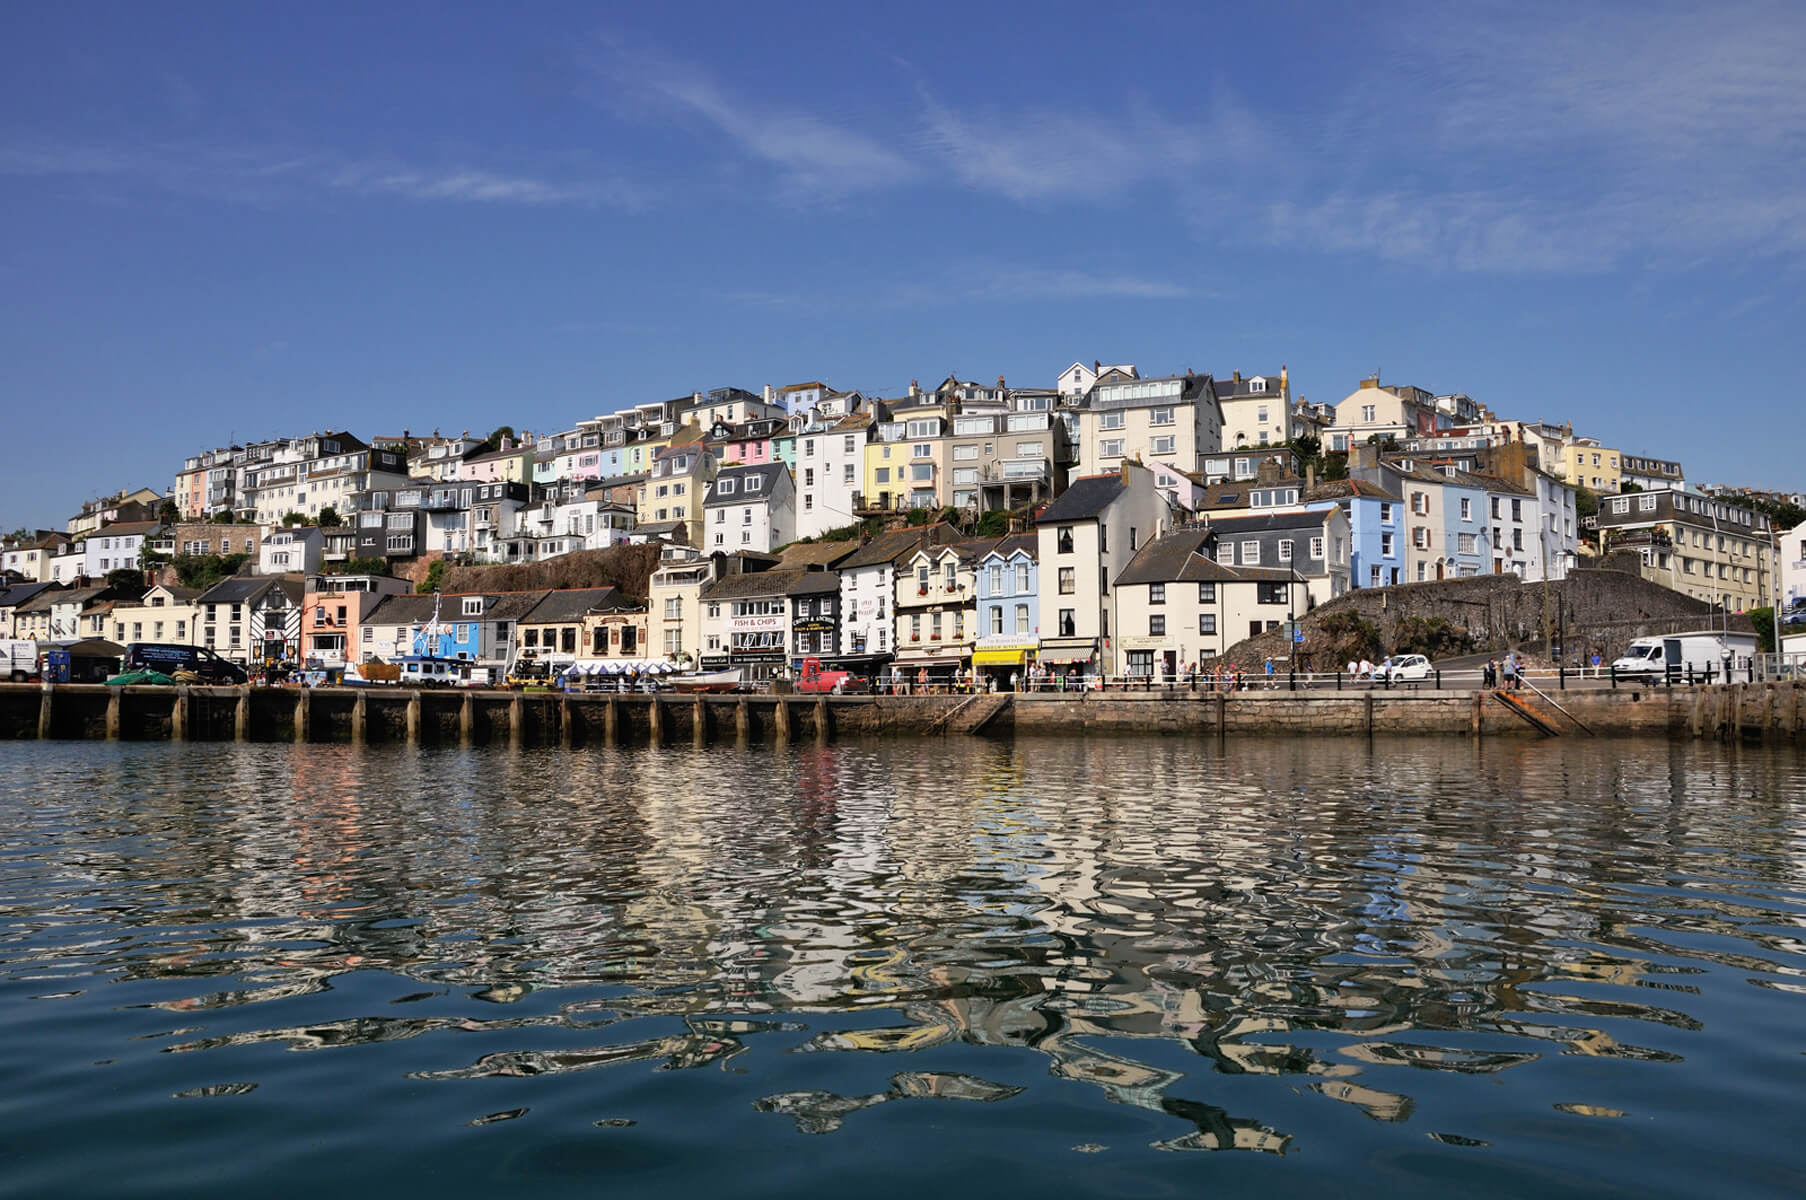 brixham inner harbour2 - A different view of England